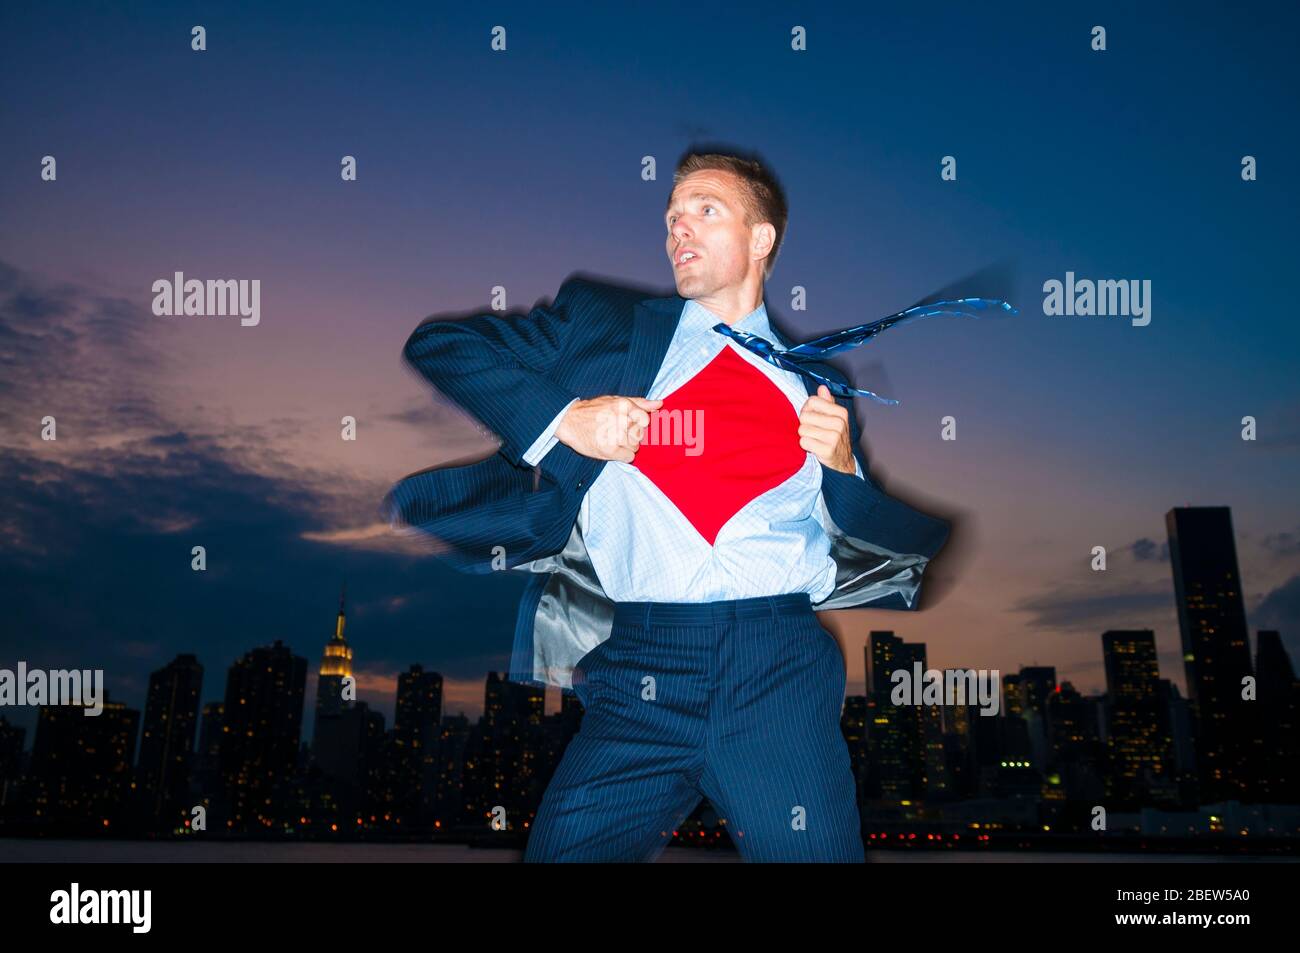 Businessman action hero arriving to save the day in front of a city skyline at night Stock Photo